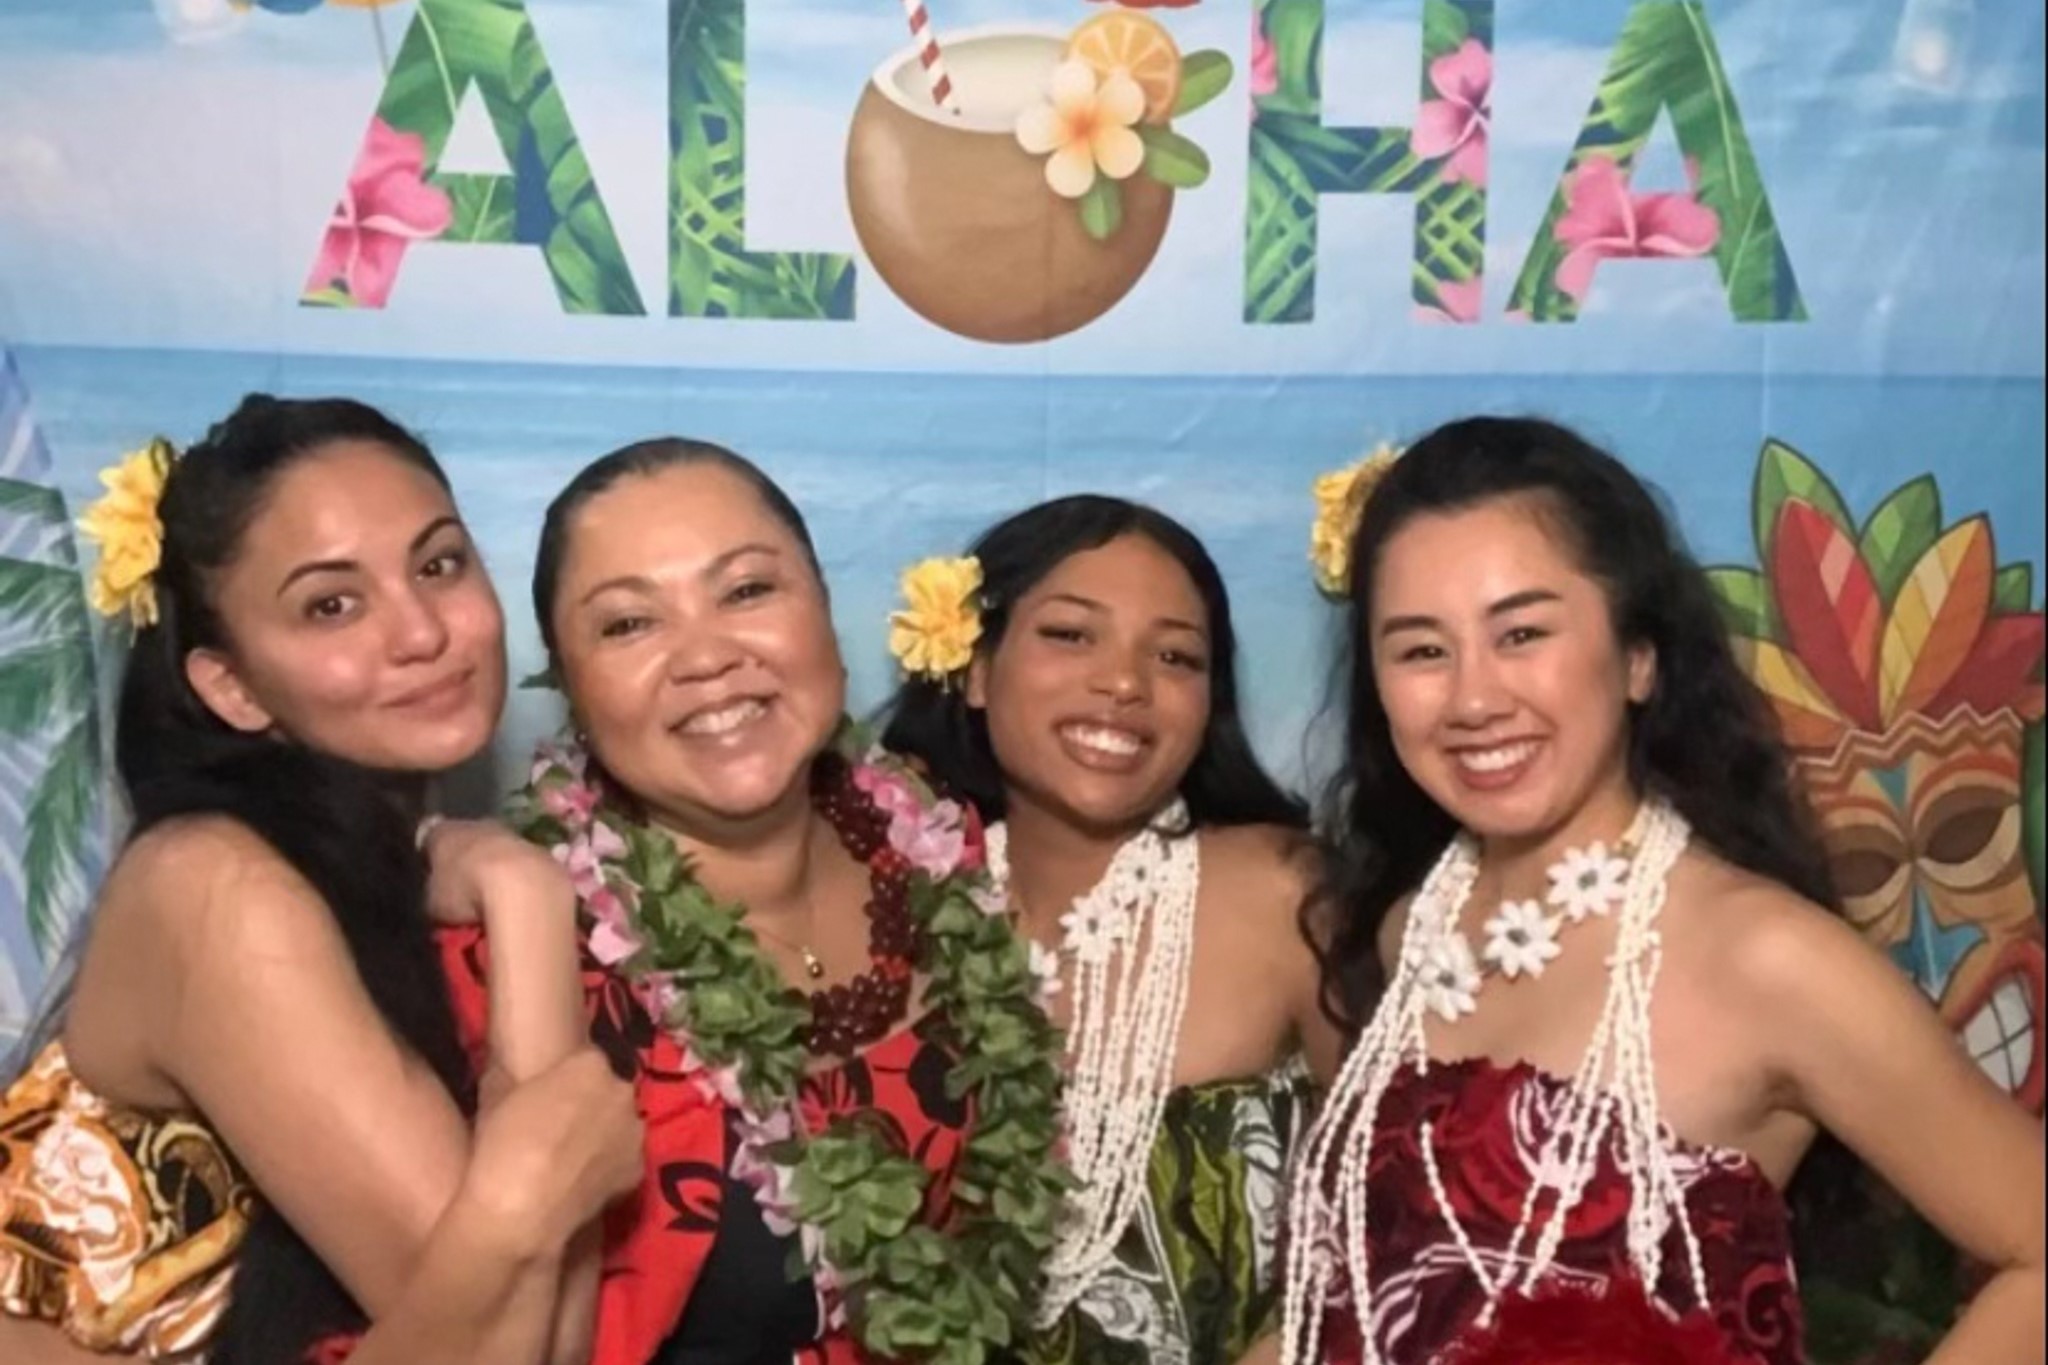 Photo Booth with the Hula Girls